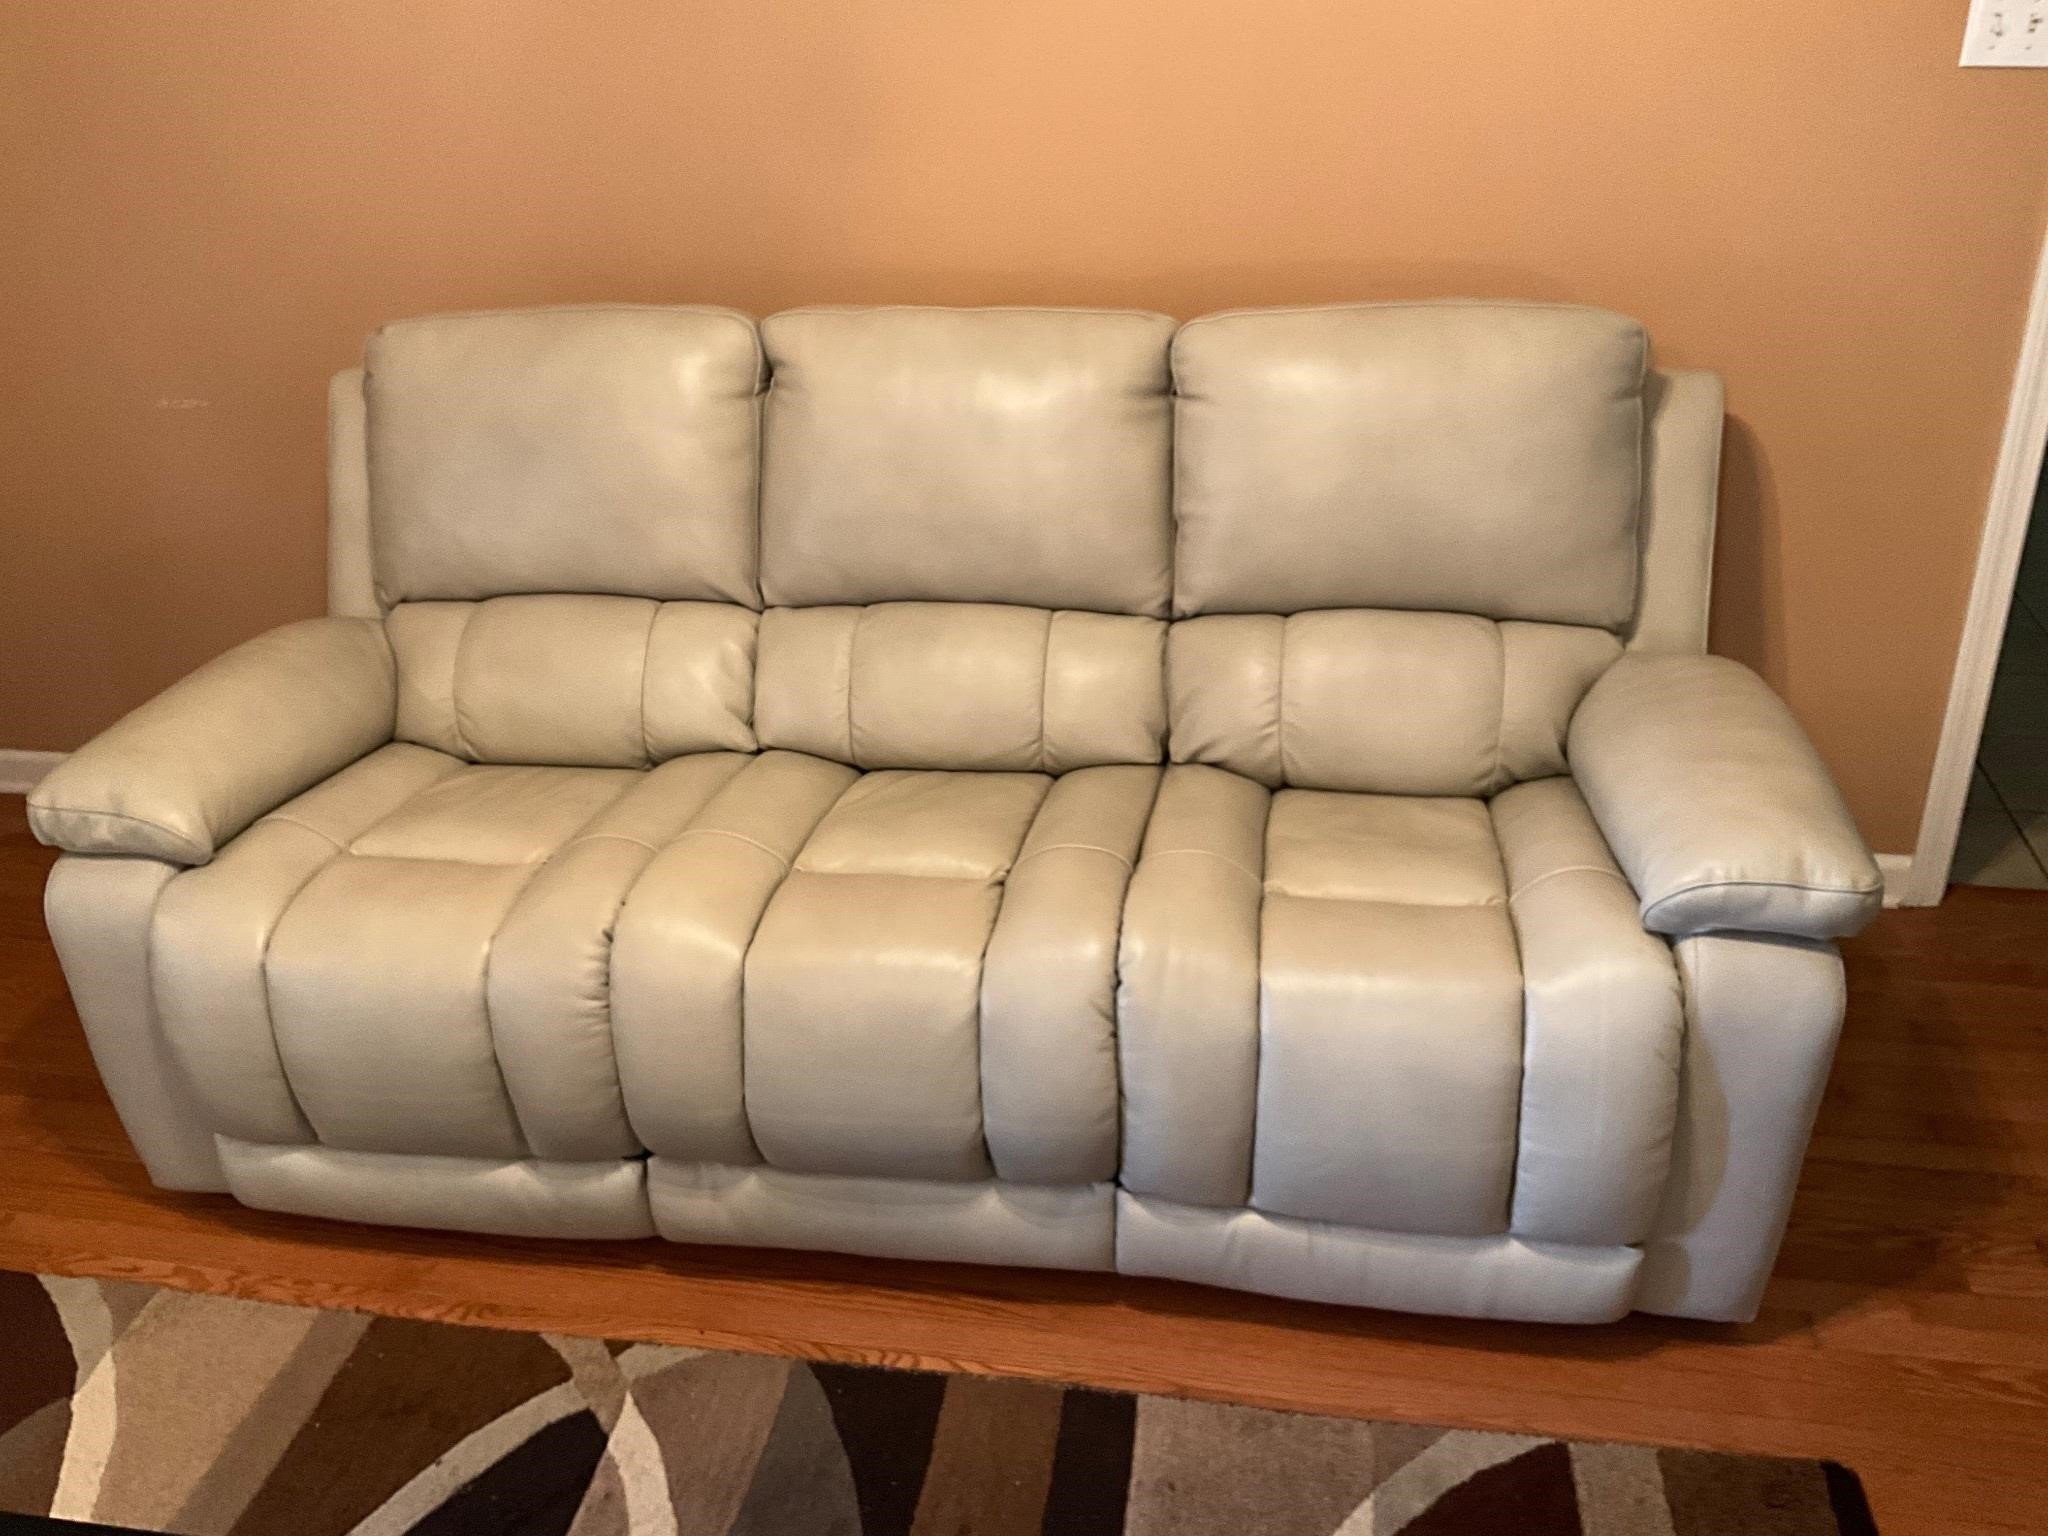 NICE leather double recliner cough- 7 ft